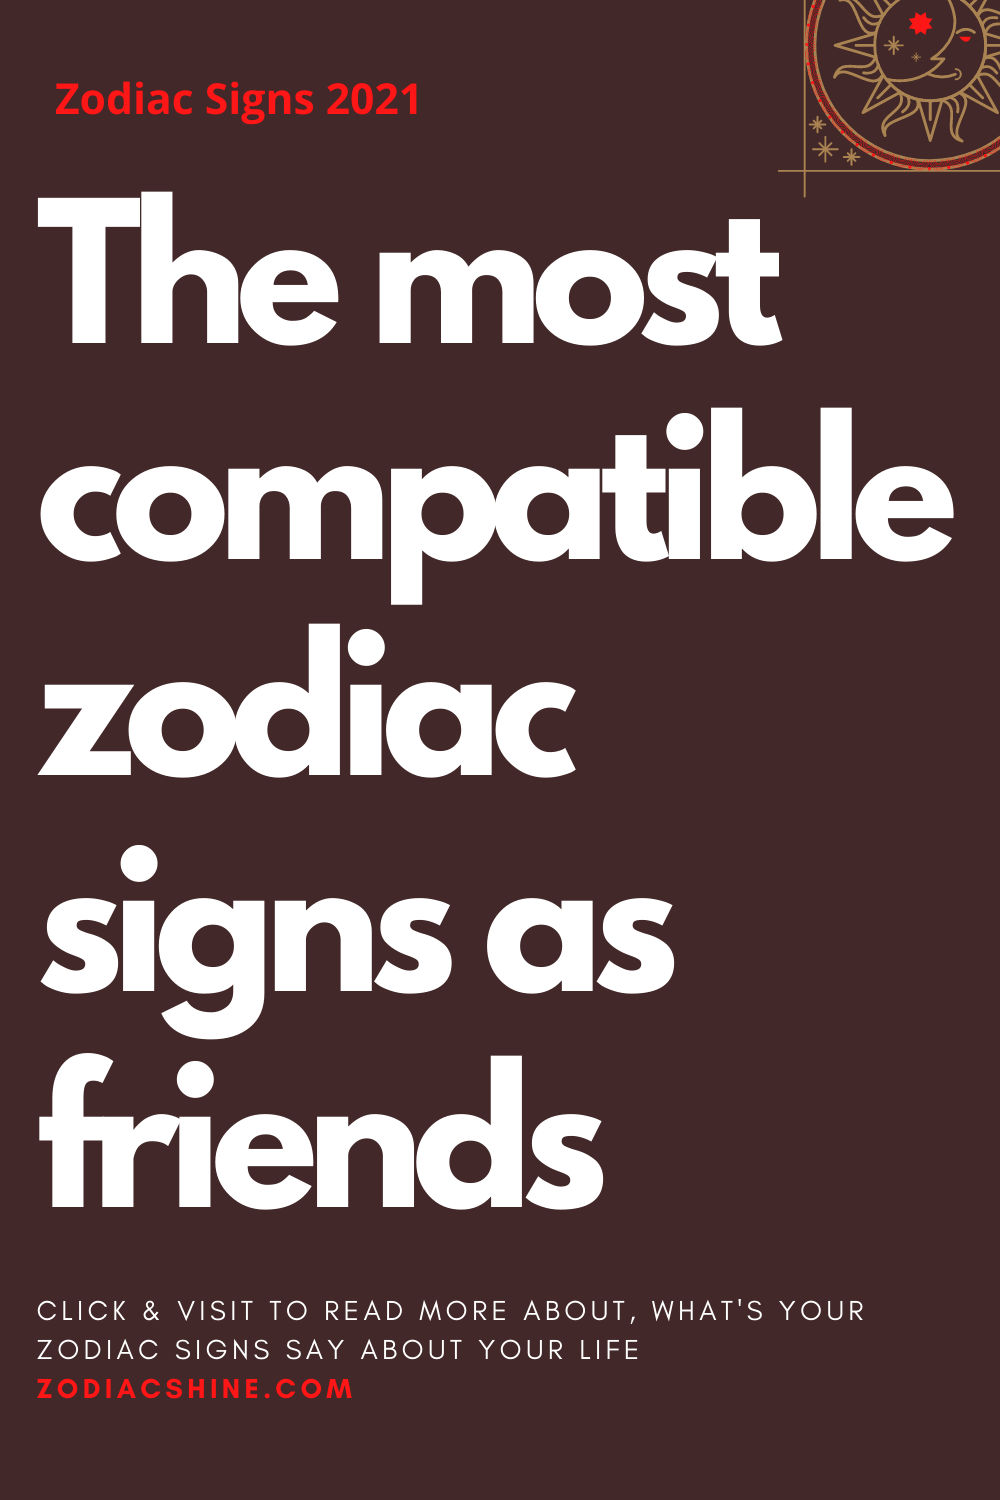 The most compatible zodiac signs as friends